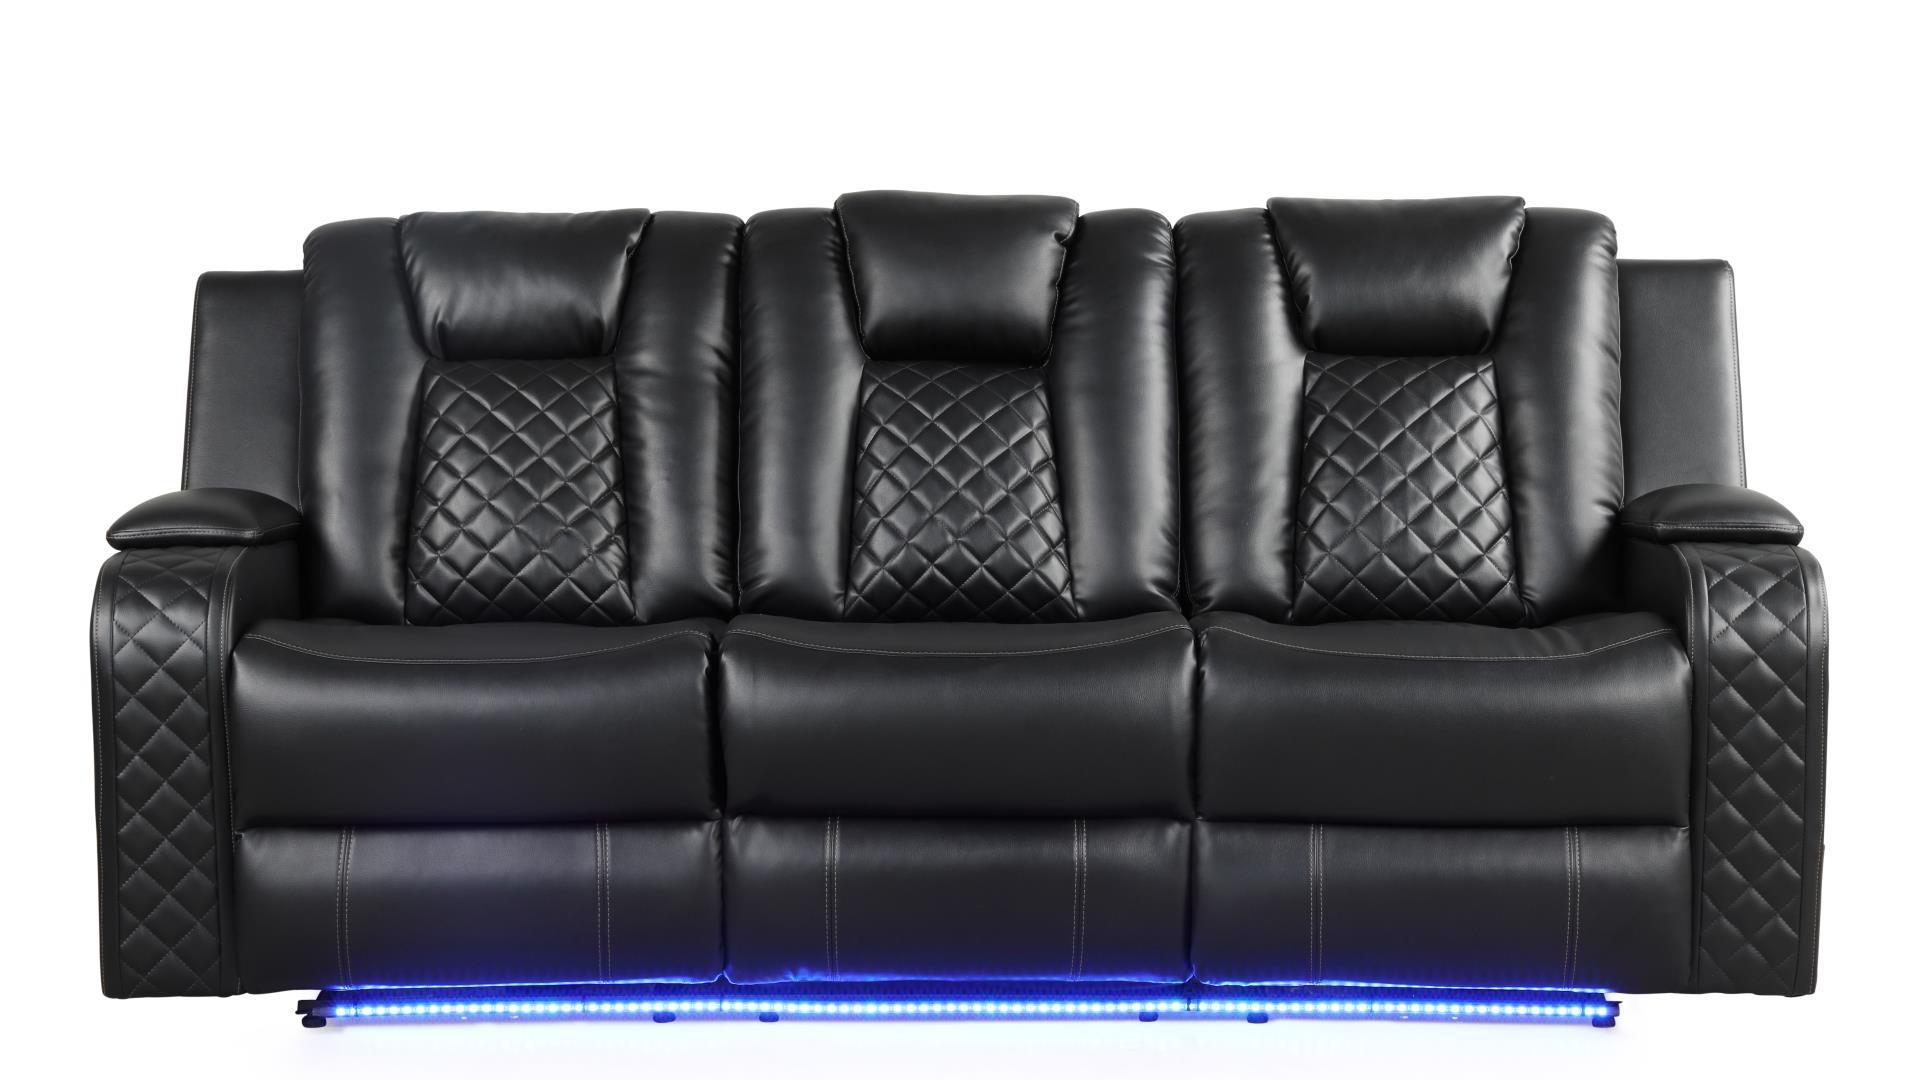 Contemporary, Modern Recliner Sofa BENZ 659436482487 in Black Faux Leather